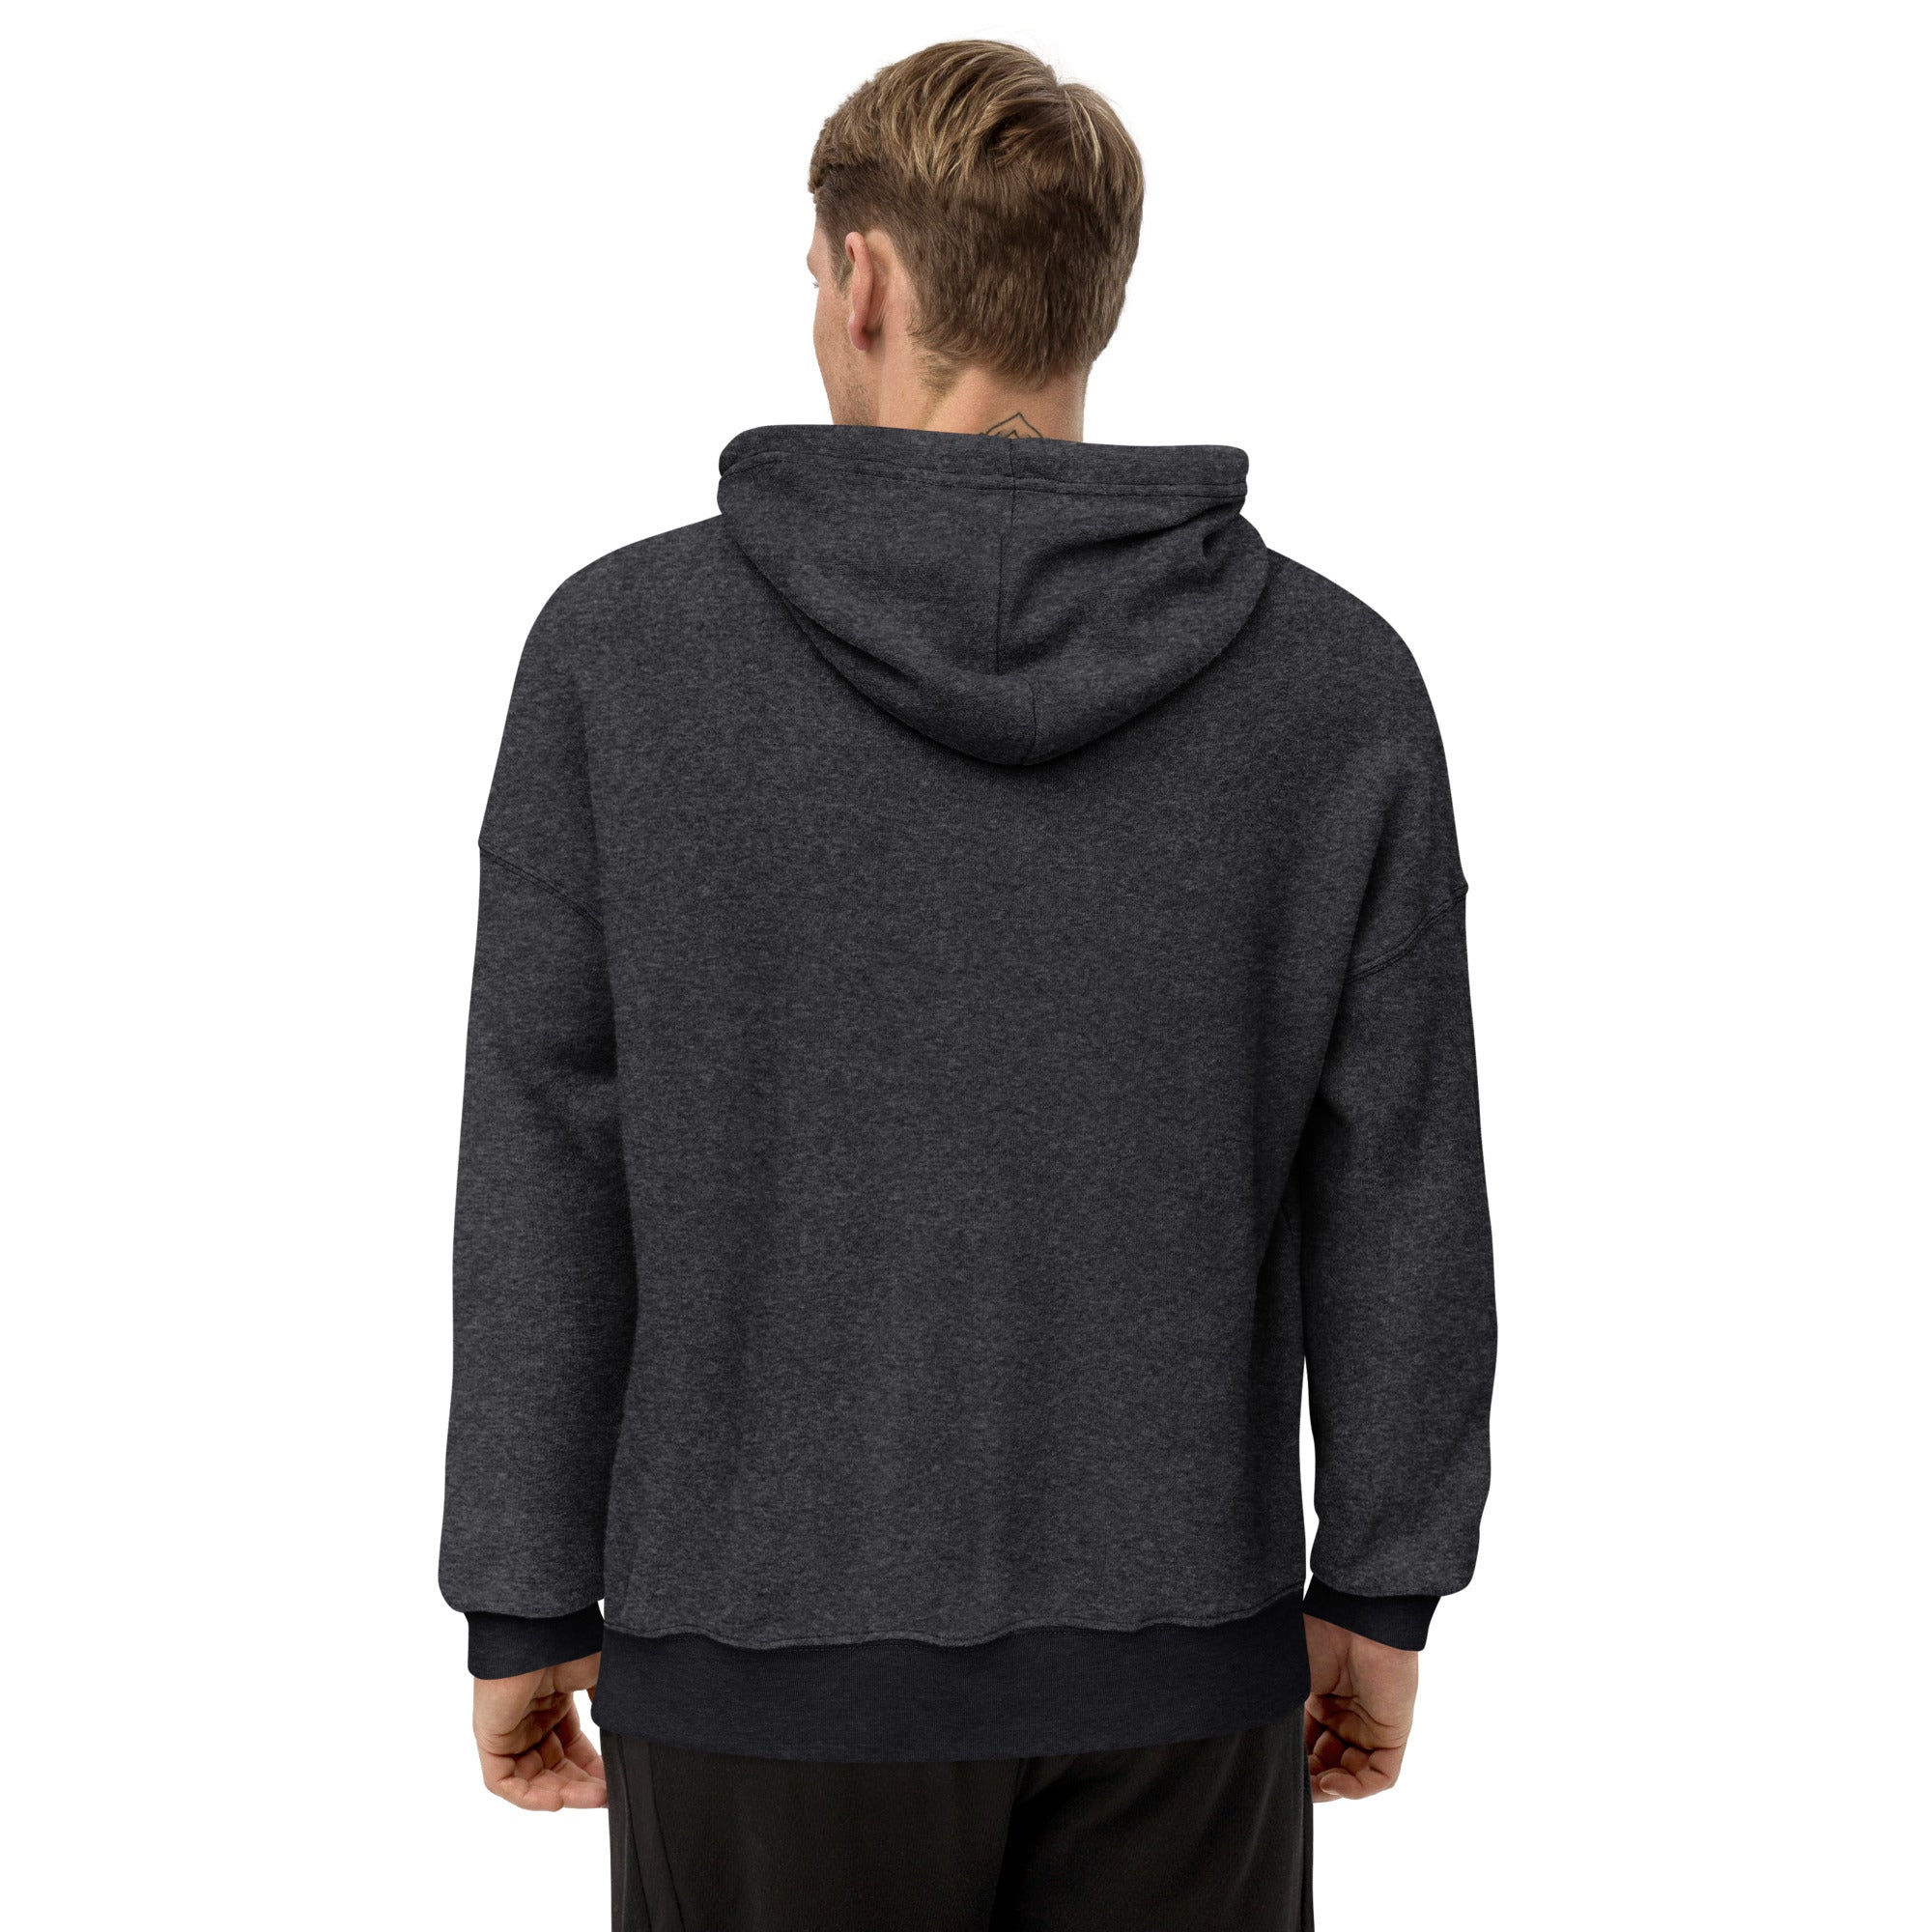 RFG Unisex sueded fleece hoodie Repton Fitness and Boxing Gears